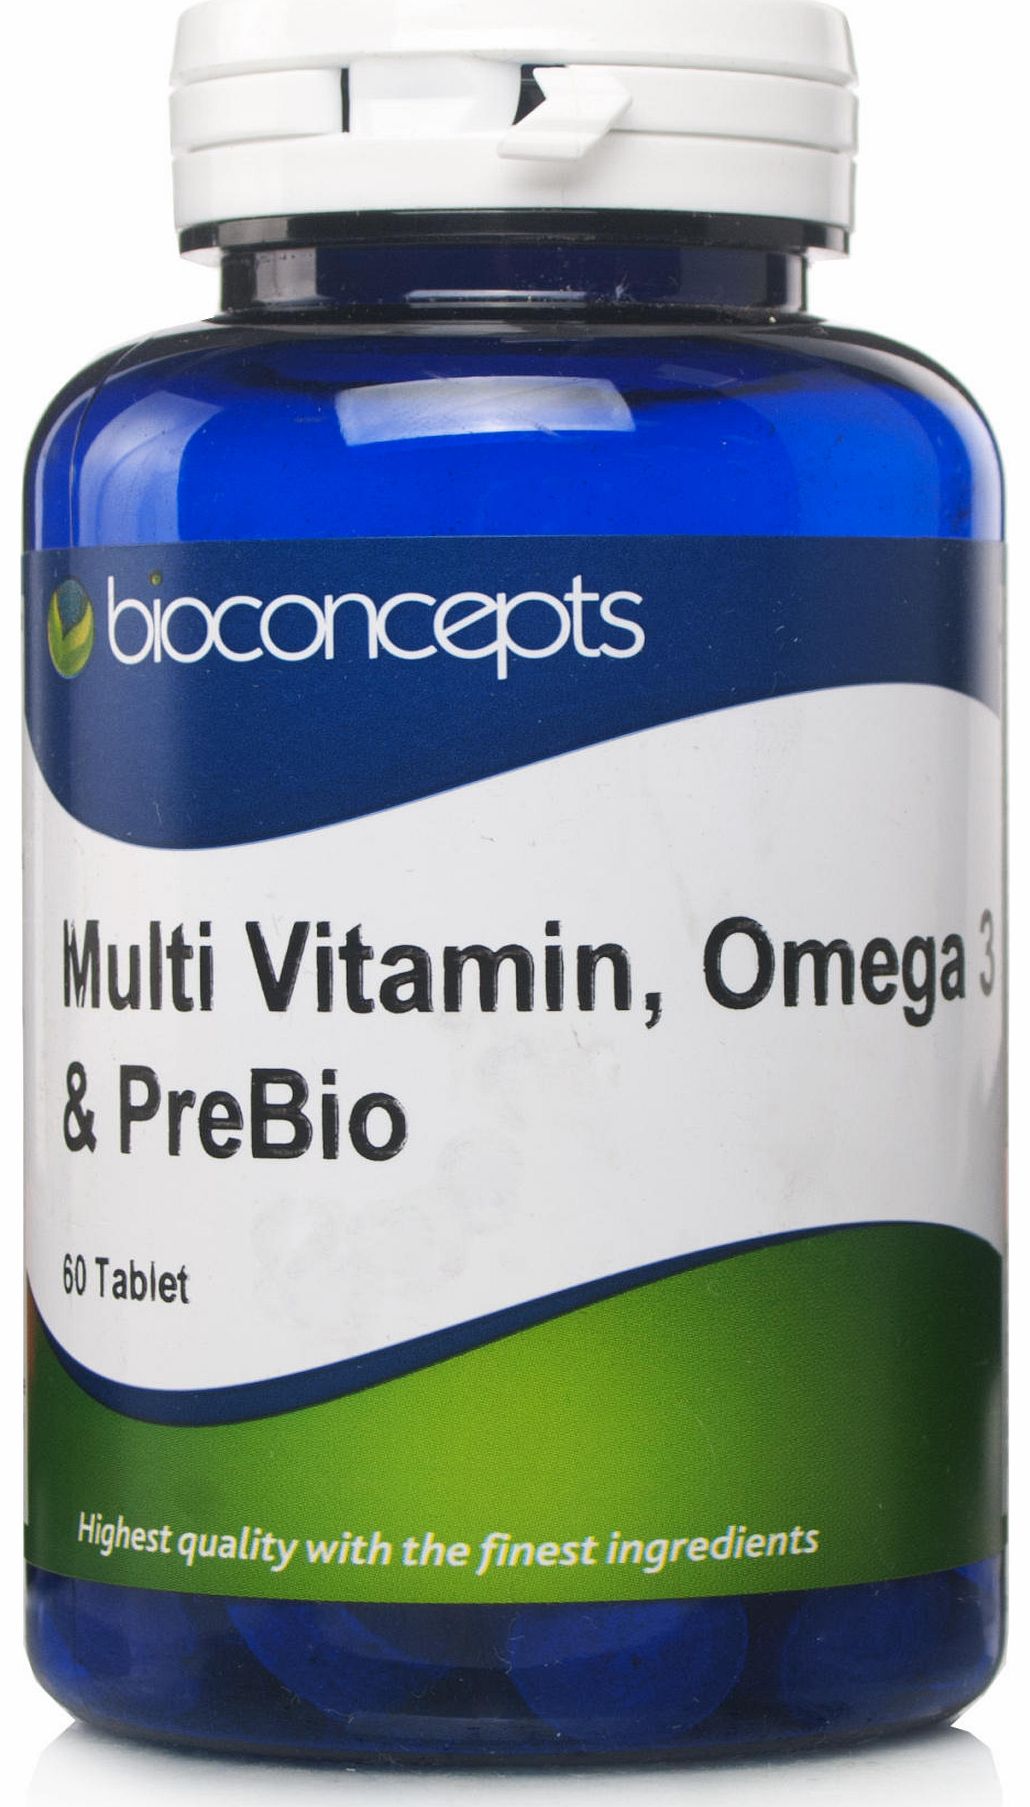 Bioconcepts Multivitamin with Omega 3 and